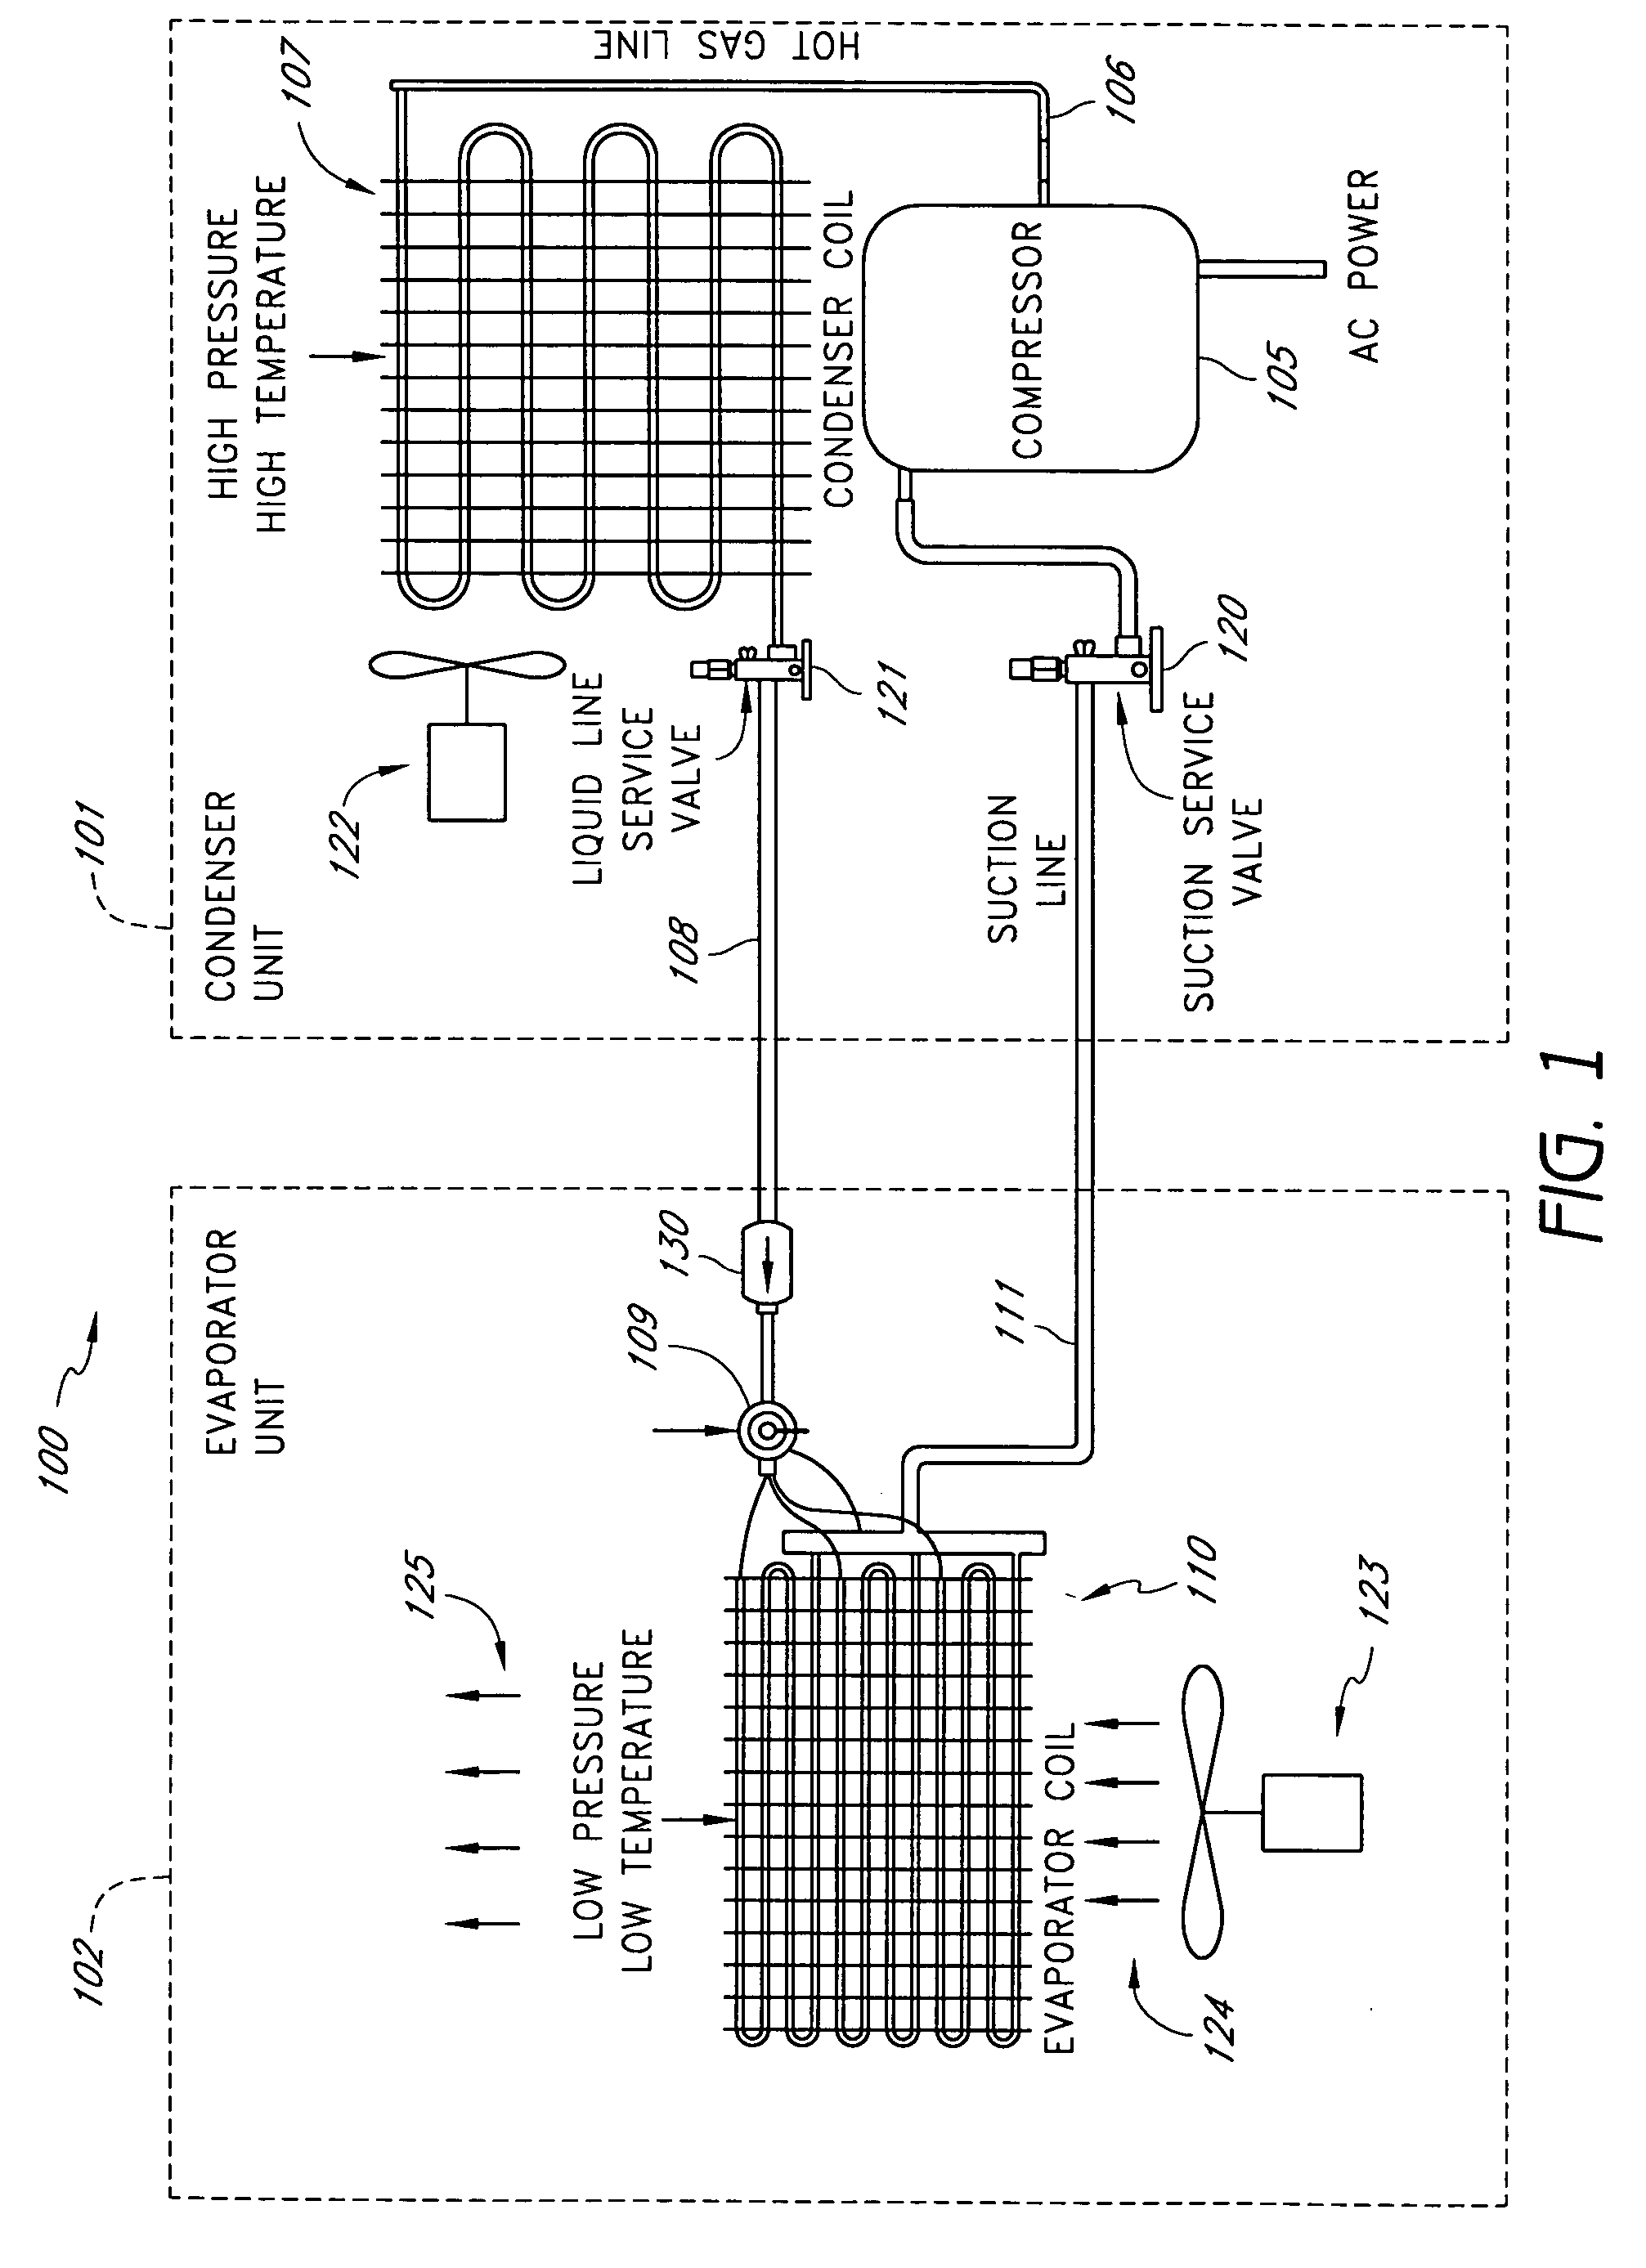 Intelligent thermostat system for monitoring a refrigerant-cycle apparatus